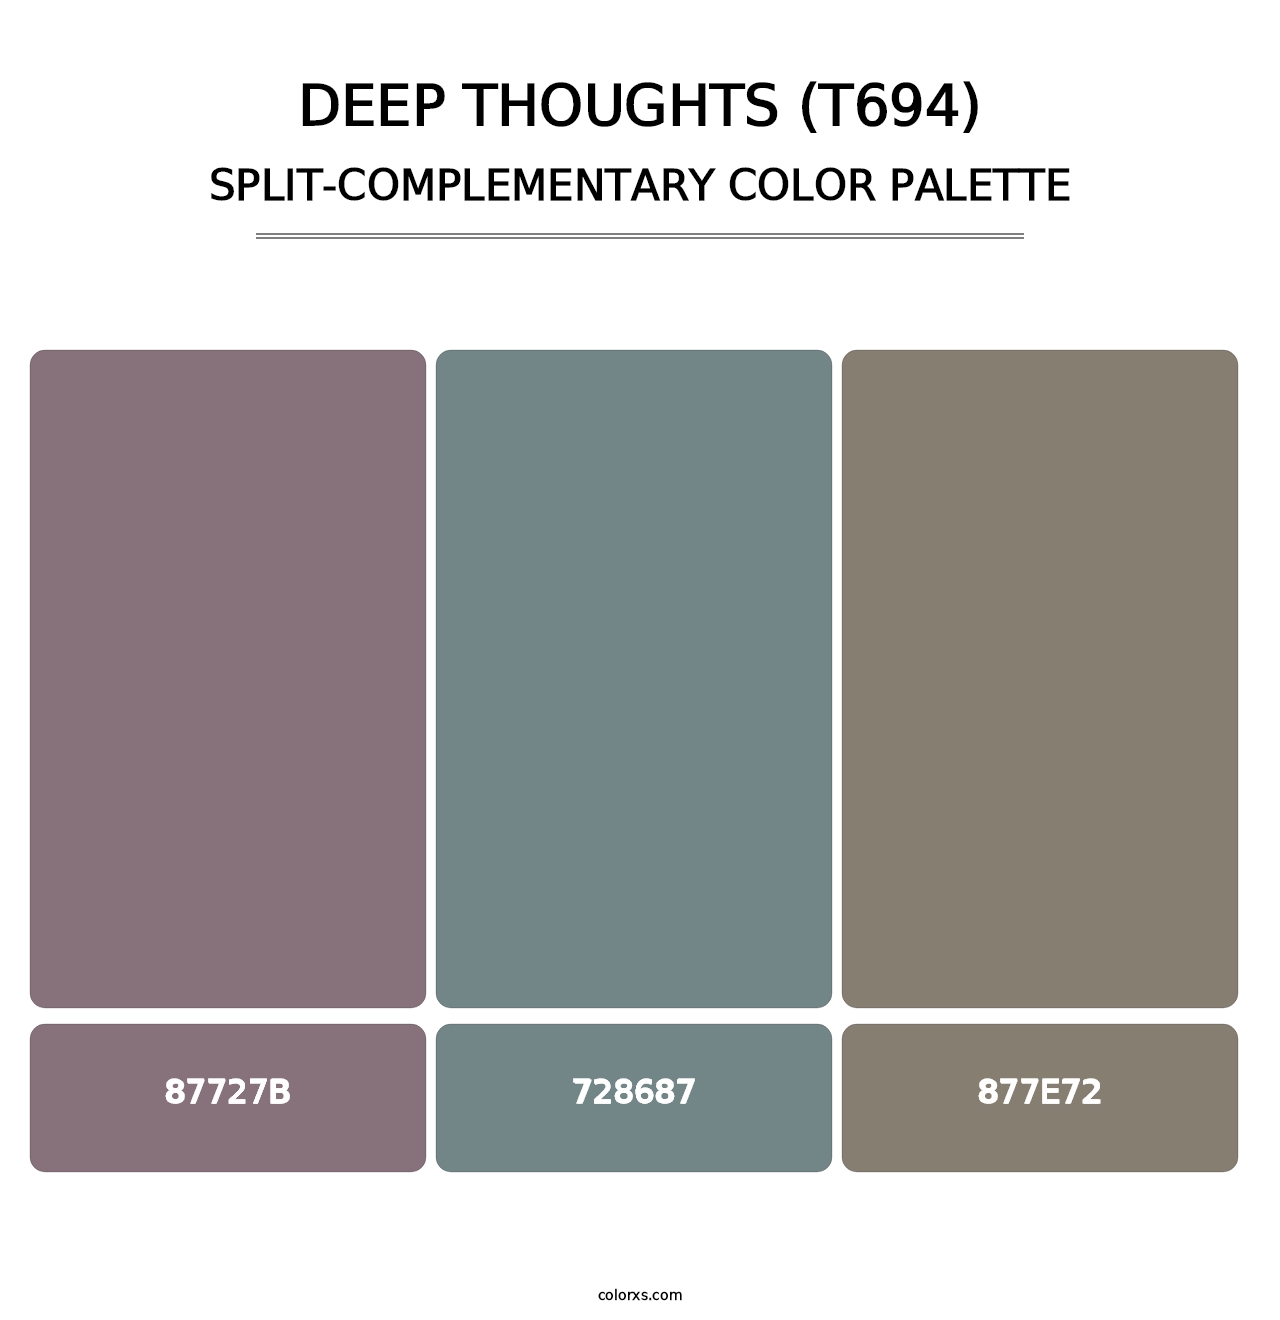 Deep Thoughts (T694) - Split-Complementary Color Palette